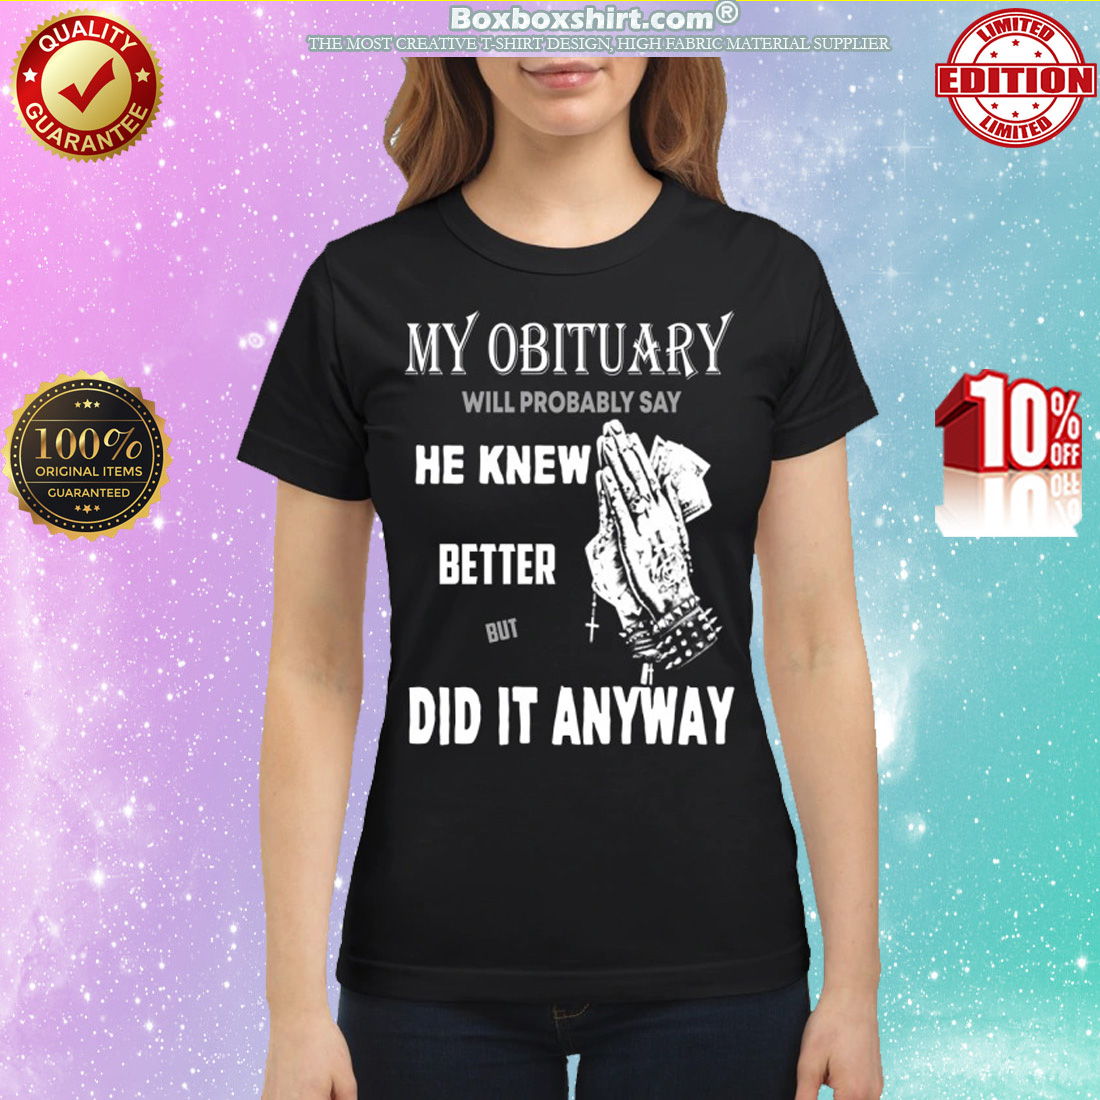 My obituary will say he knew better but did it anyway classic shirt